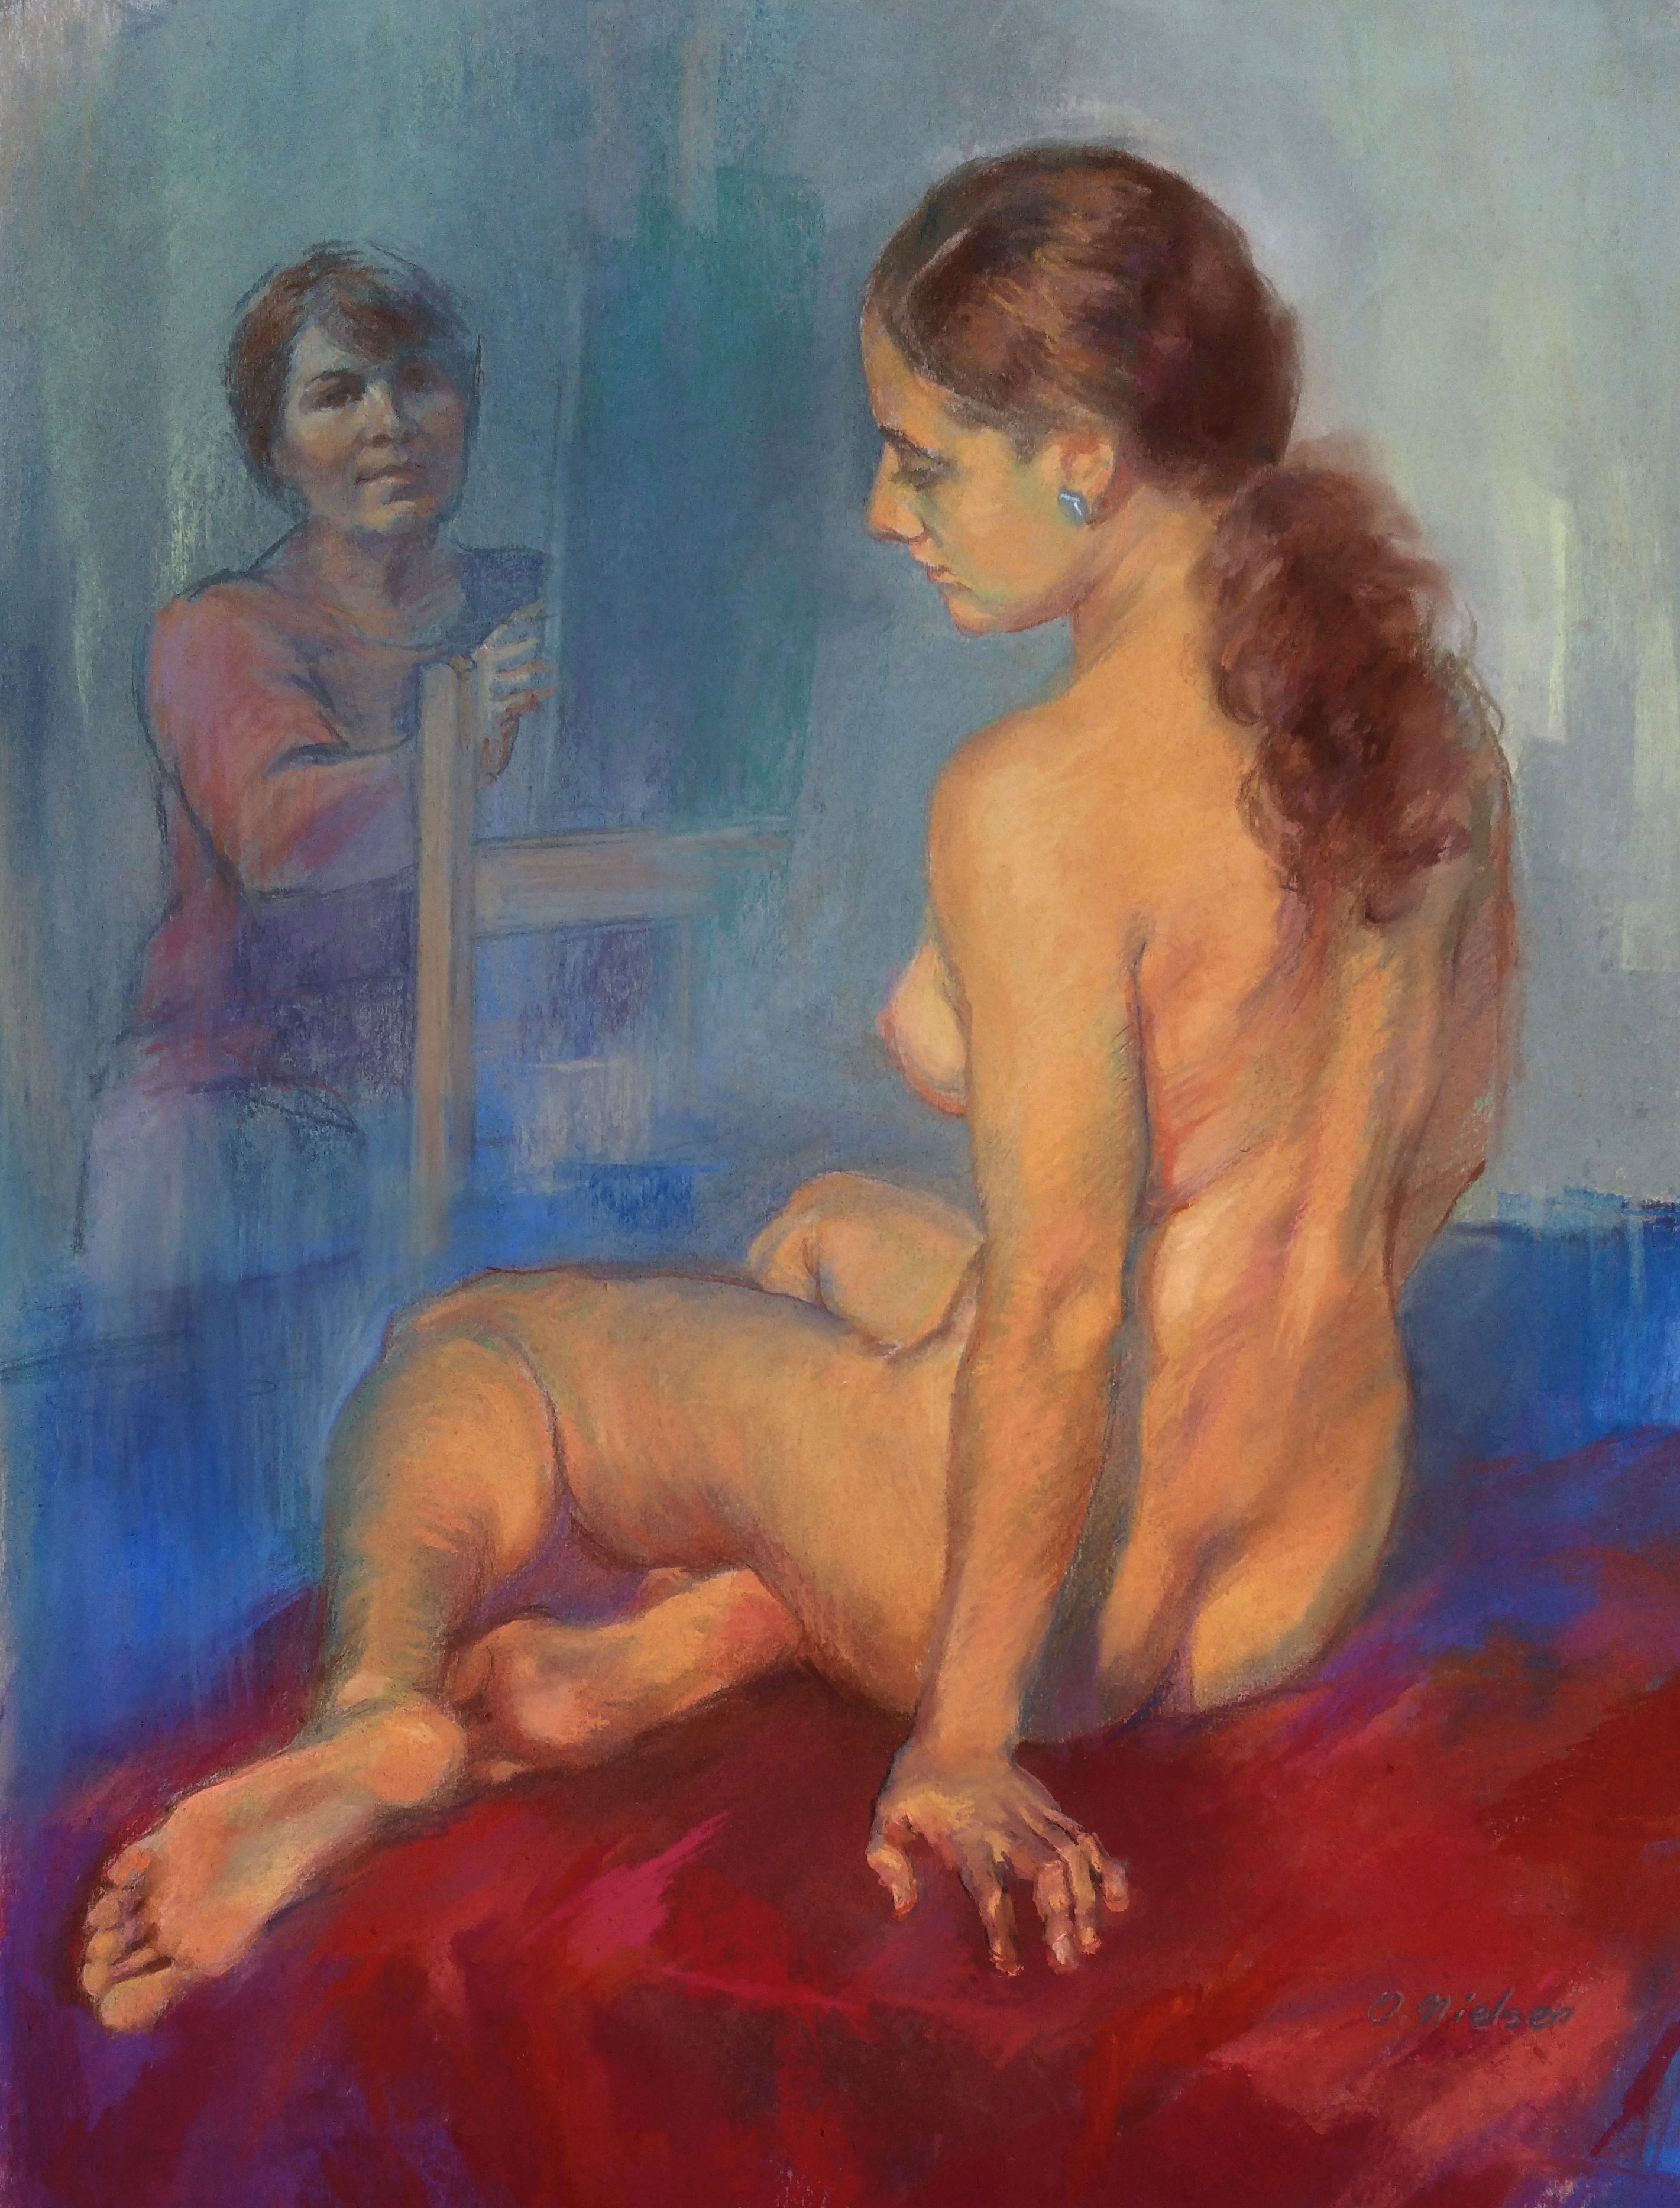 Self-portrait with the Model, Pastel, 22 x 17